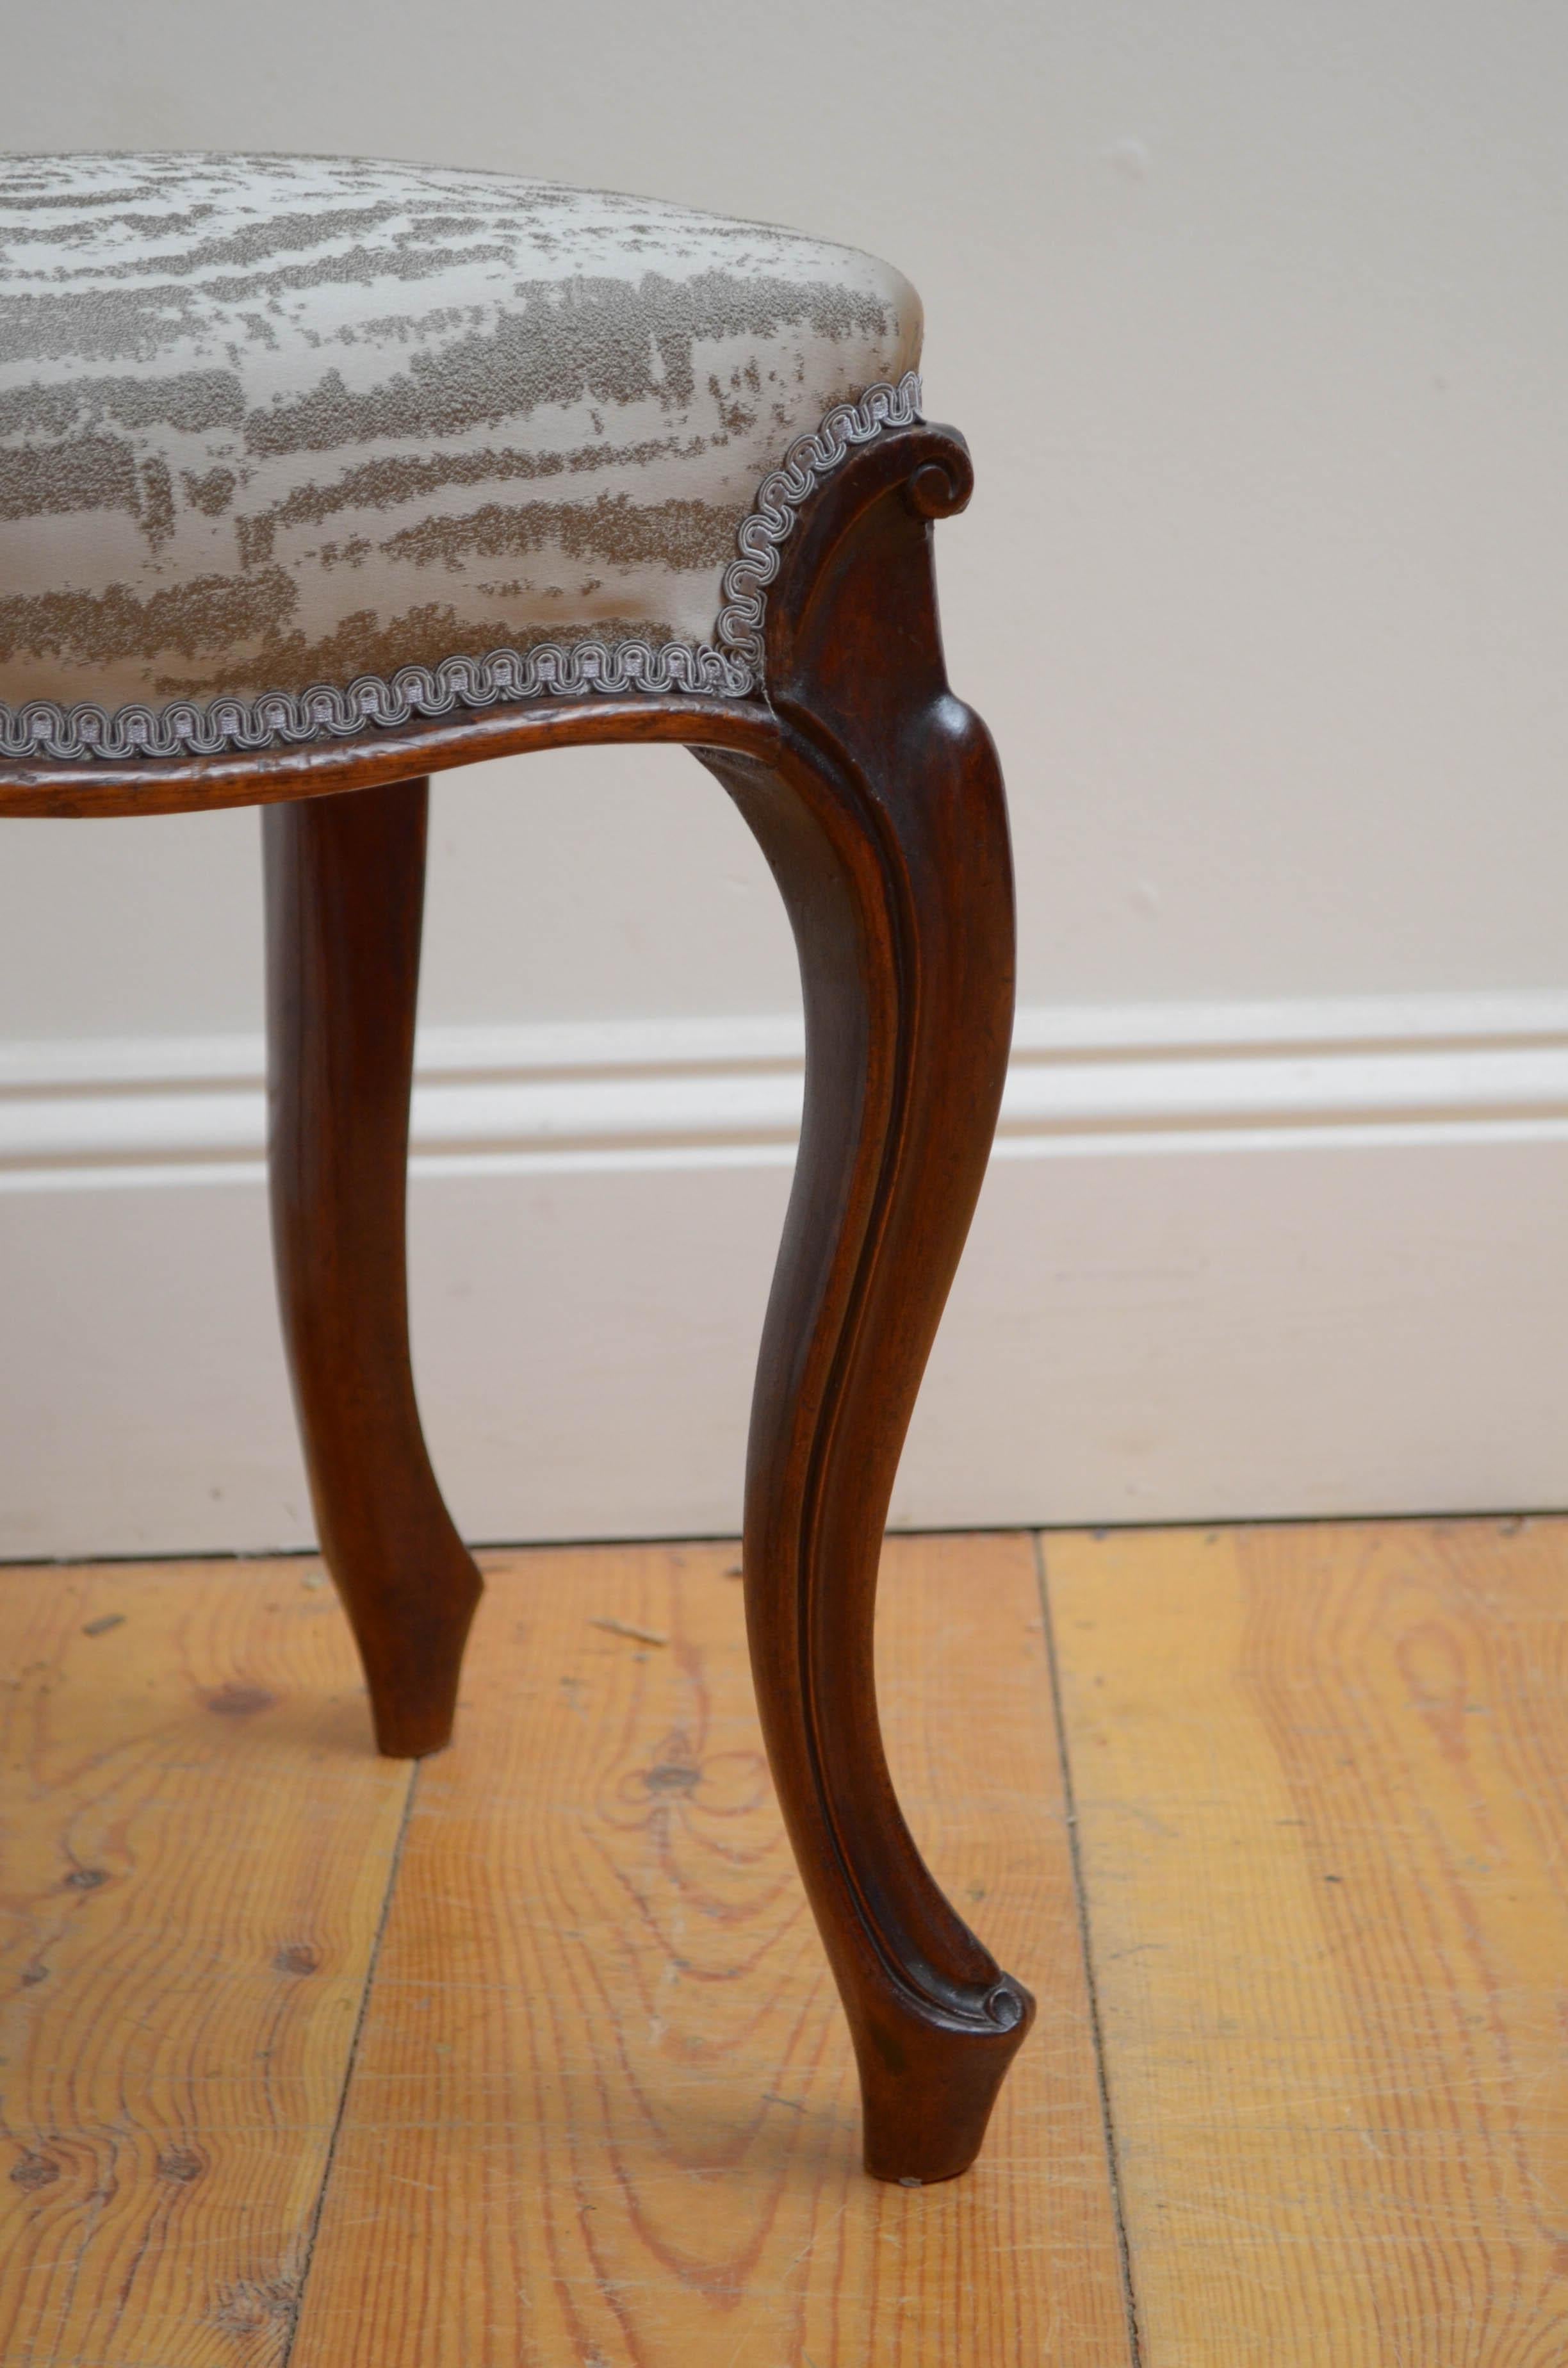 Fine Victorian Mahogany Dressing Table Stool In Good Condition For Sale In Whaley Bridge, GB